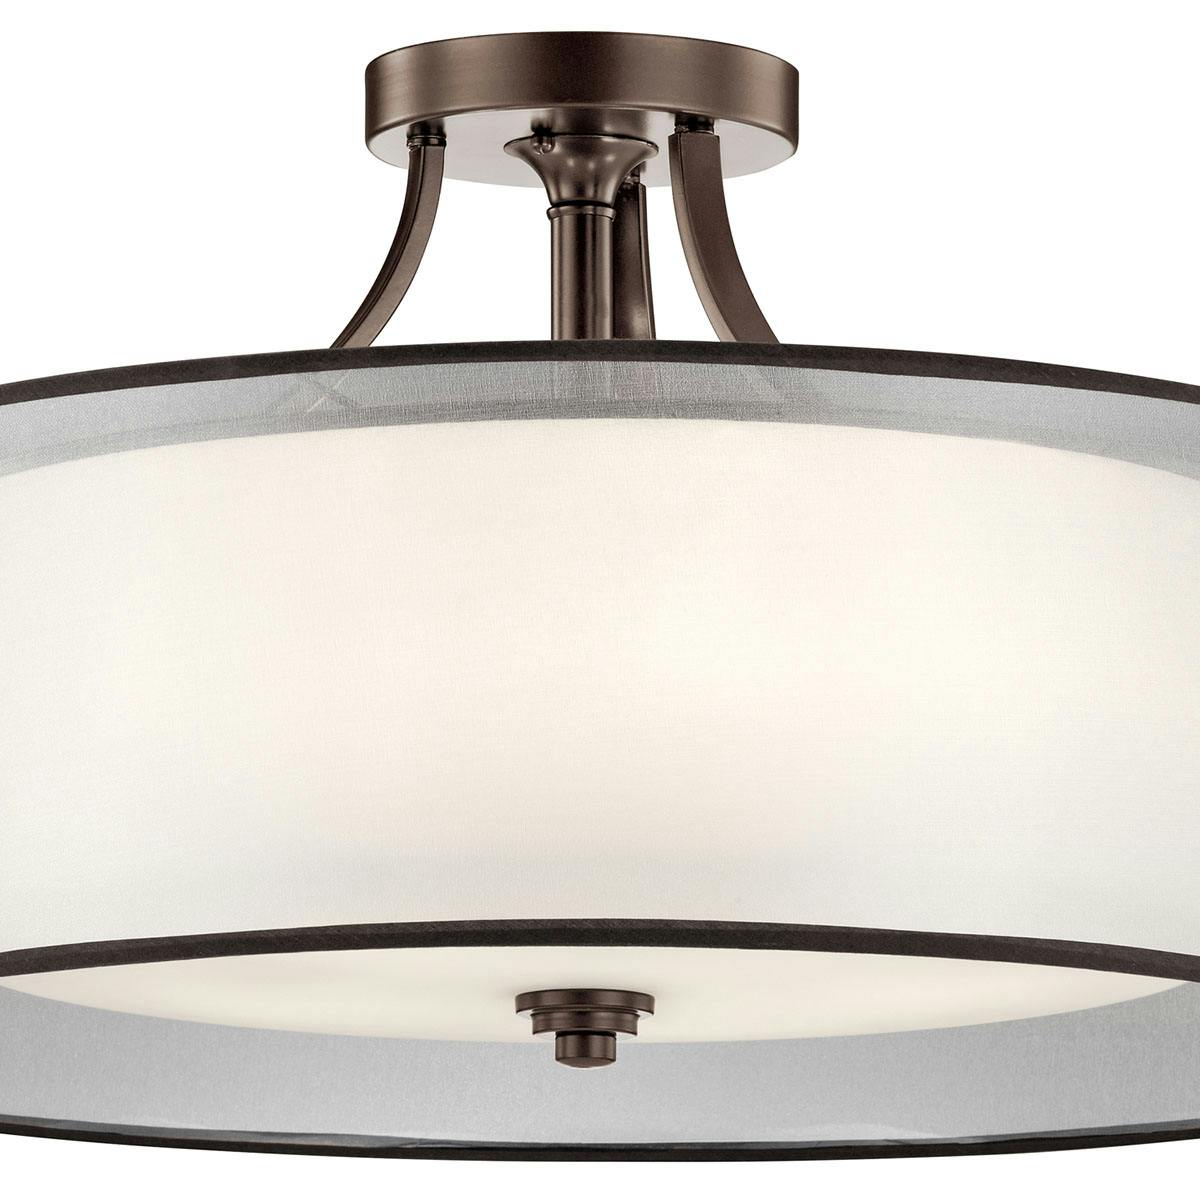 Close up view of the Lacey 28" 5 Light Semi Flush in Bronze on a white background